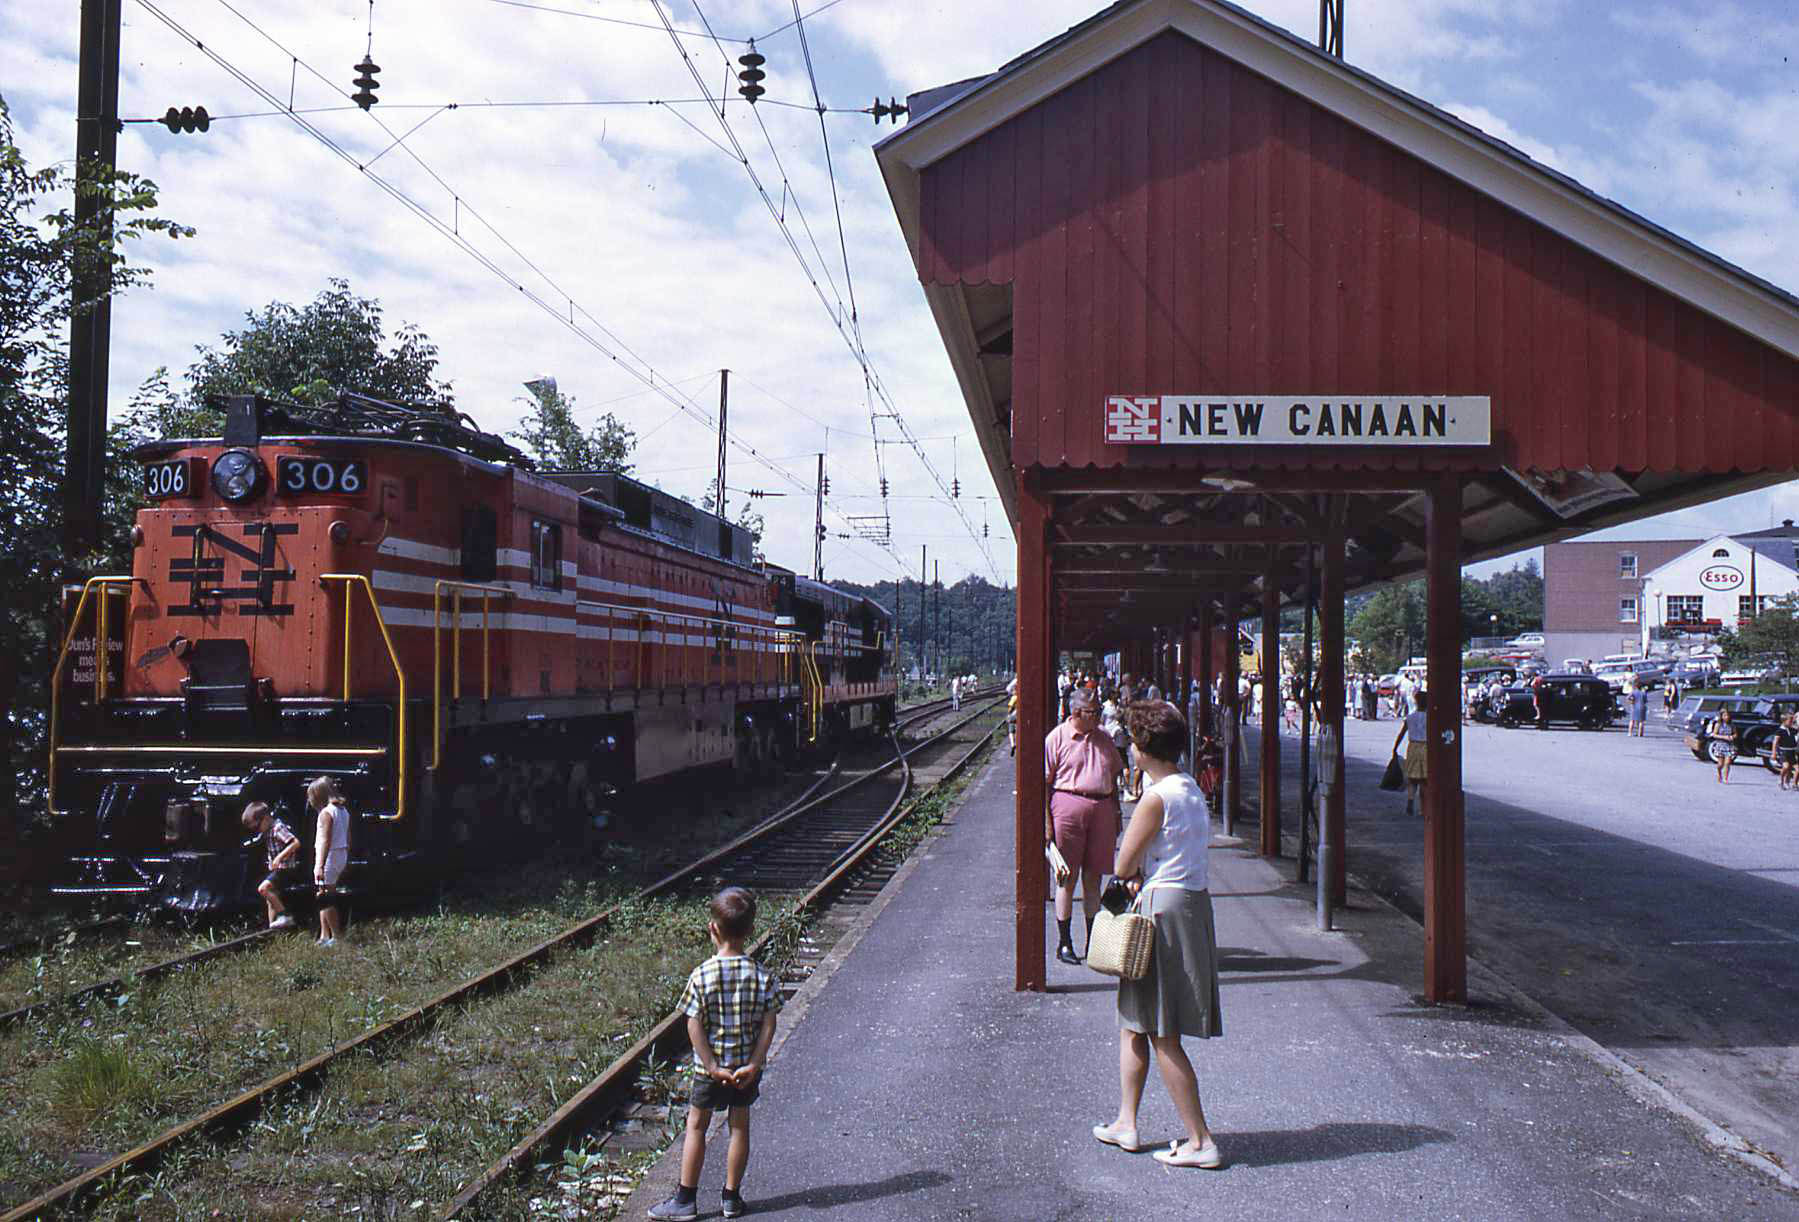 Main Station - New Canaan, Connecticut - 1968